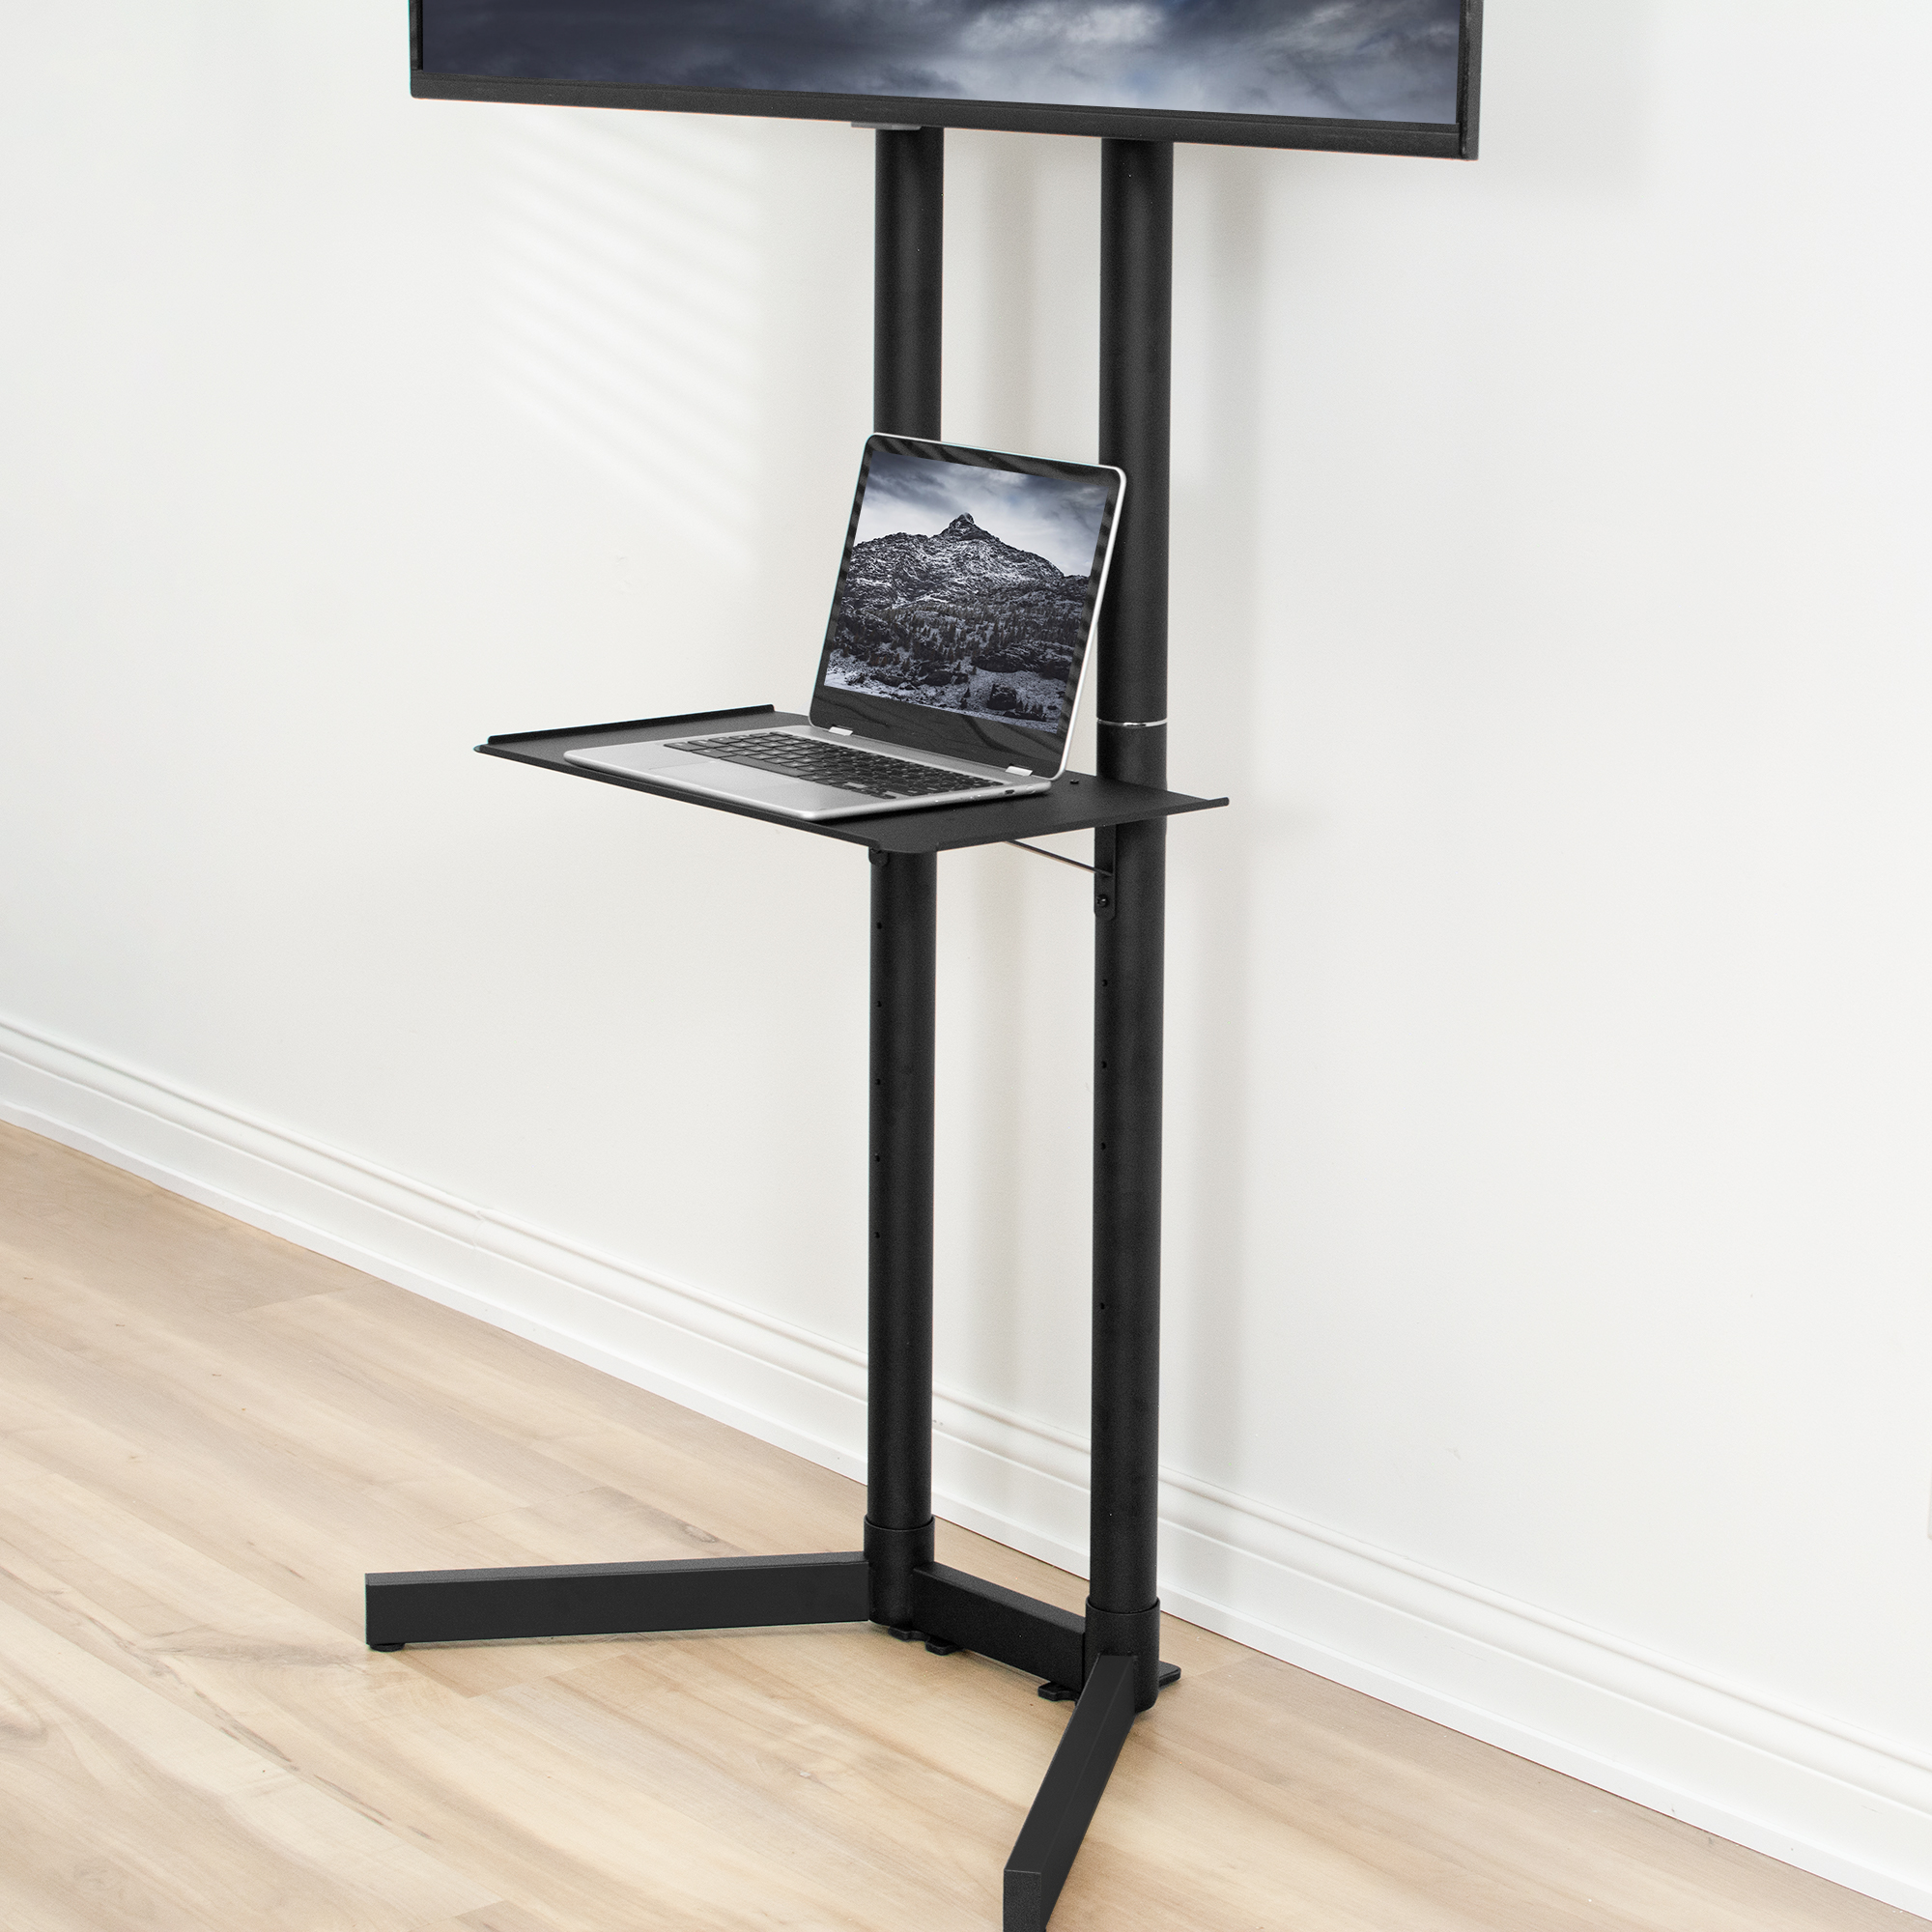 VIVO TV Floor Stand for 32" to 65" LCD LED Plasma Flat ...